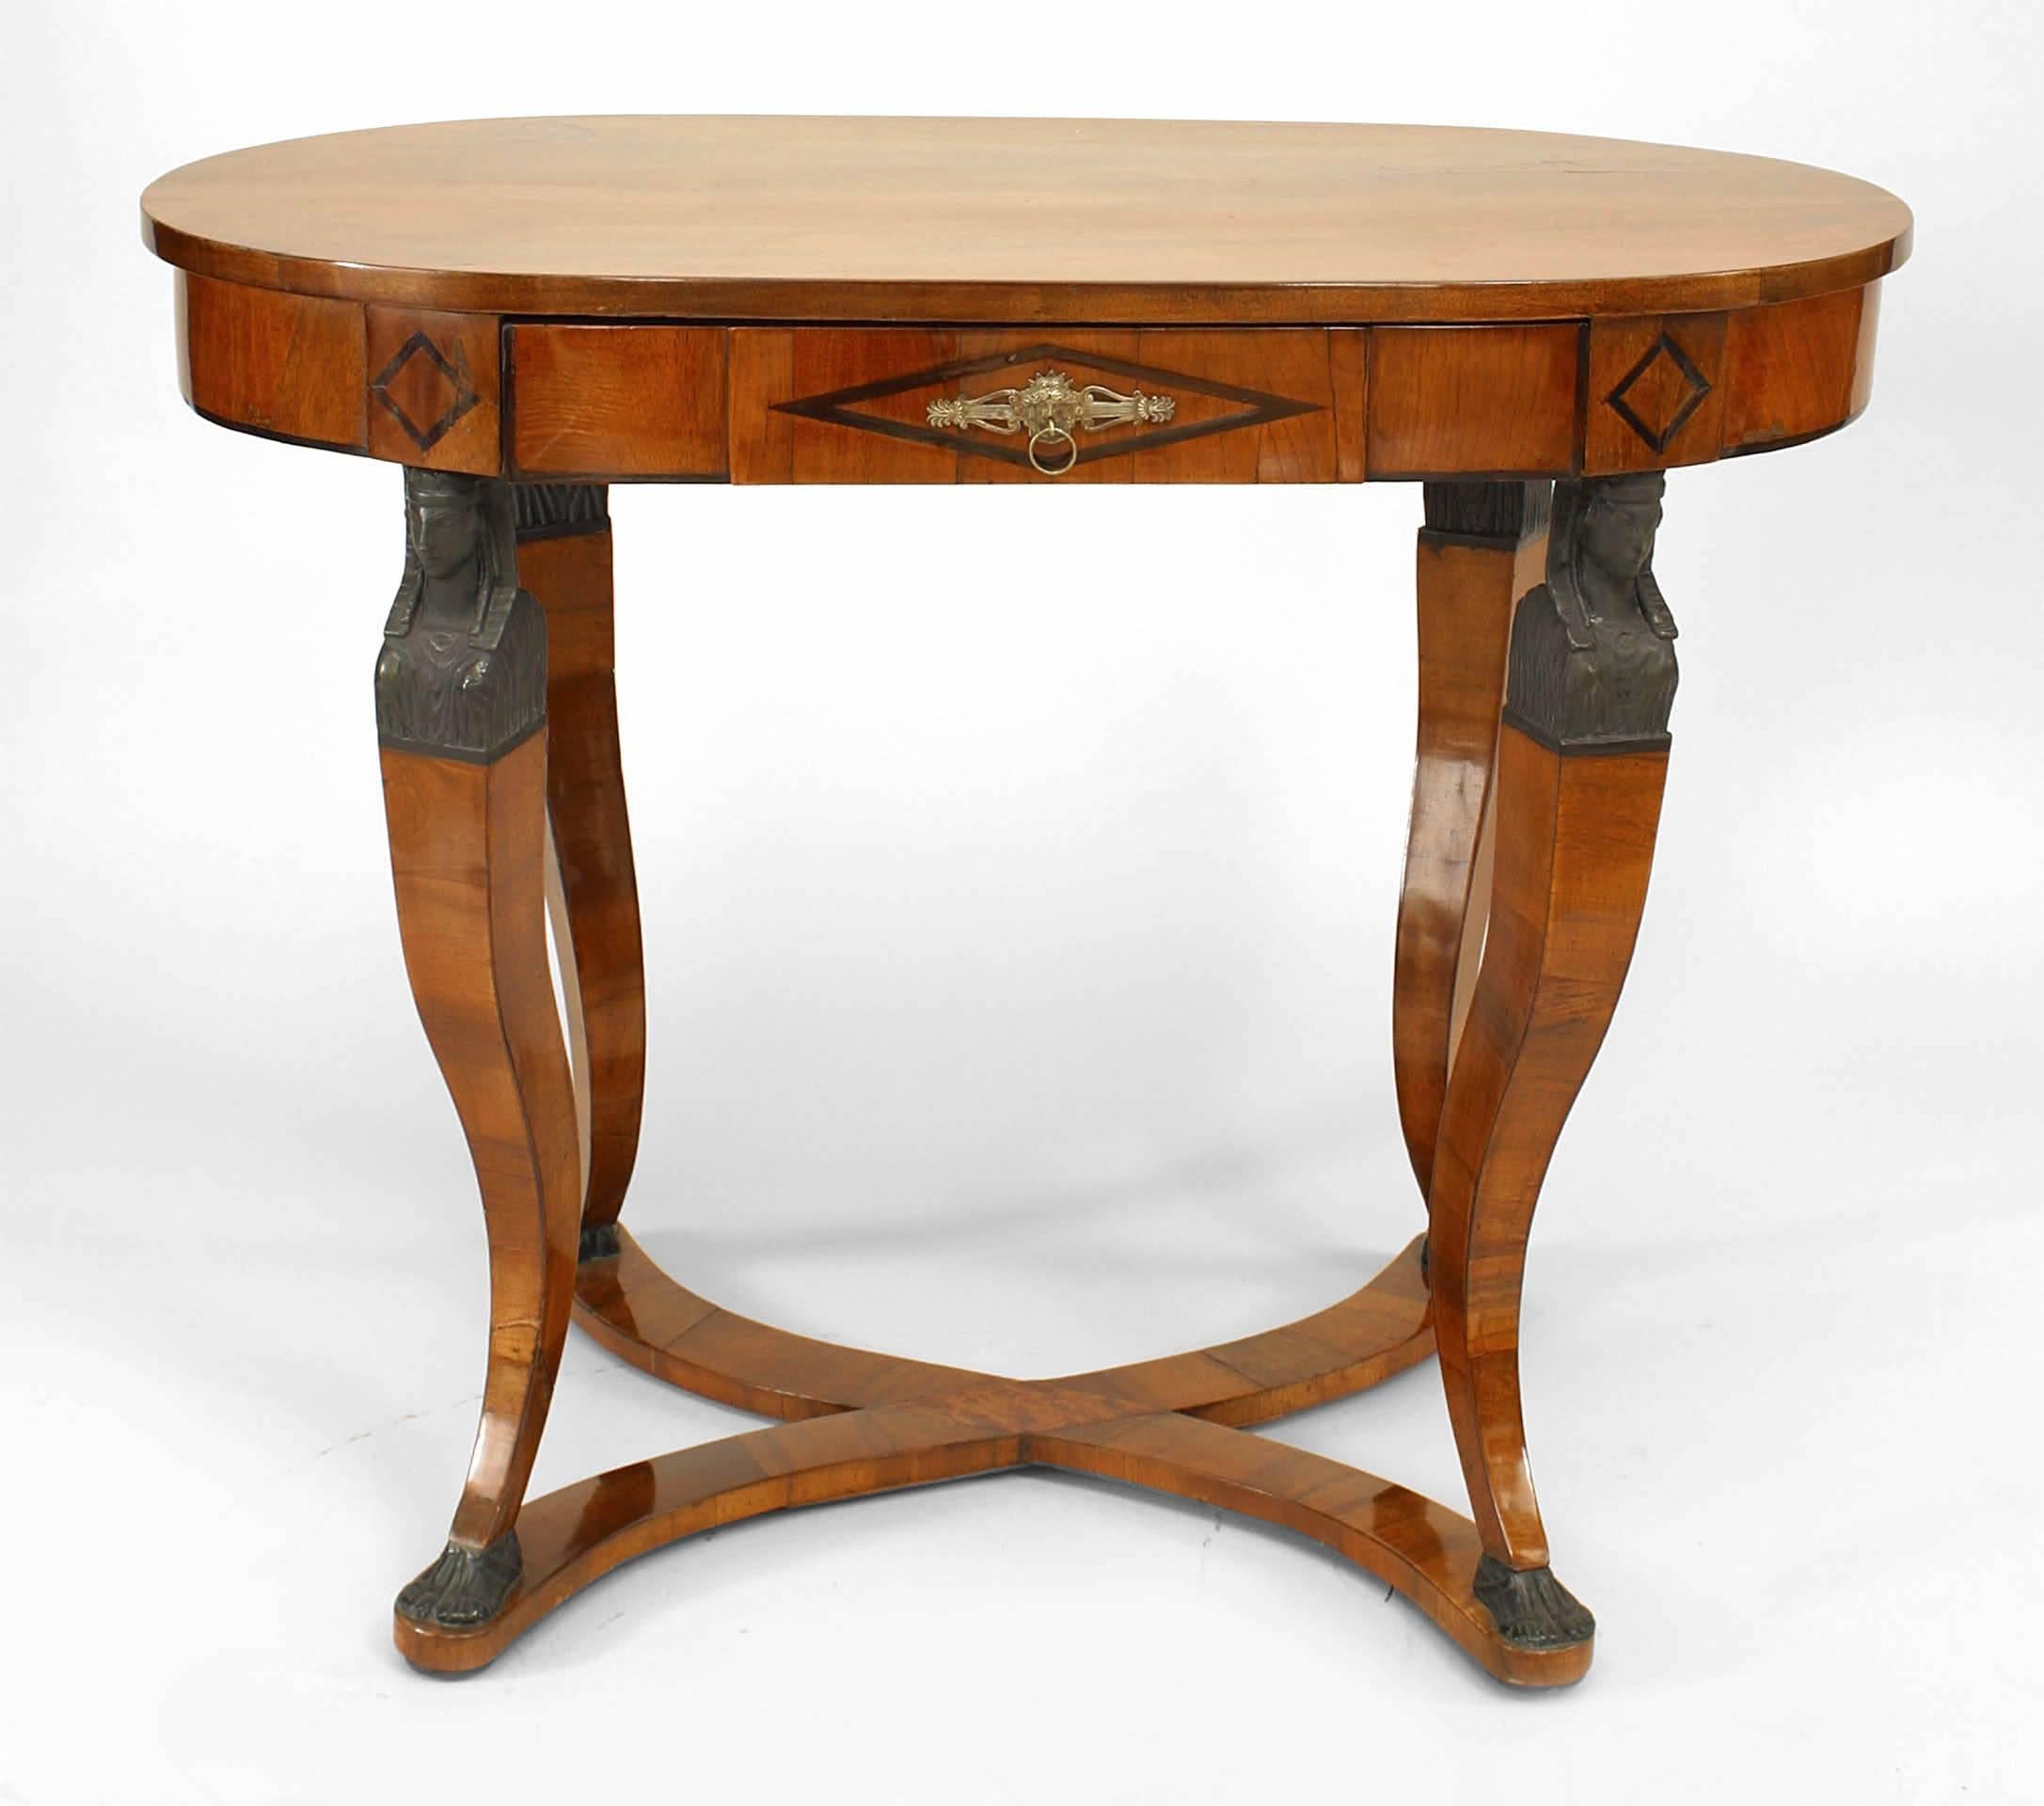 Austrian Biedermeier (Circa 1830) walnut & ebonized trimmed oval center table with drawer and 4 scroll design legs with classical figural heads ending with shaped stretcher.
